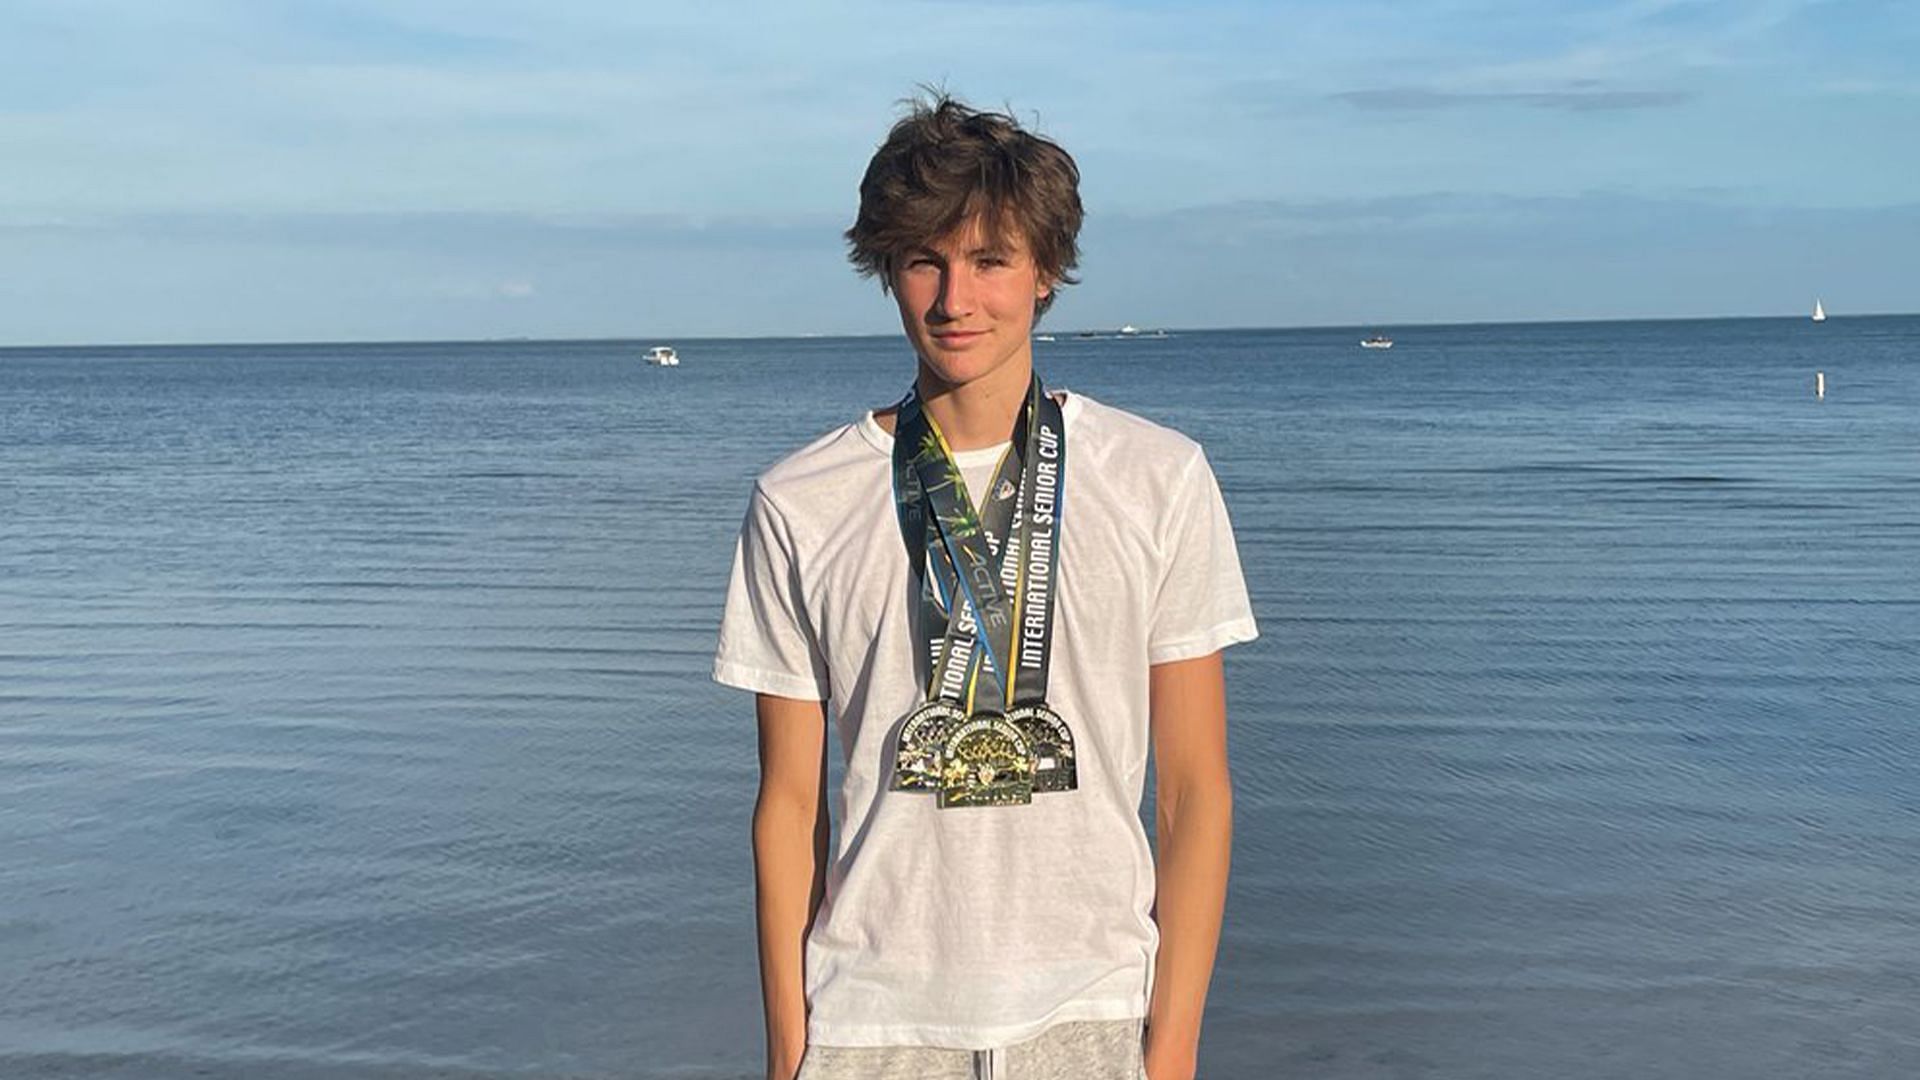 kaii winkler at a beach posing with medals 